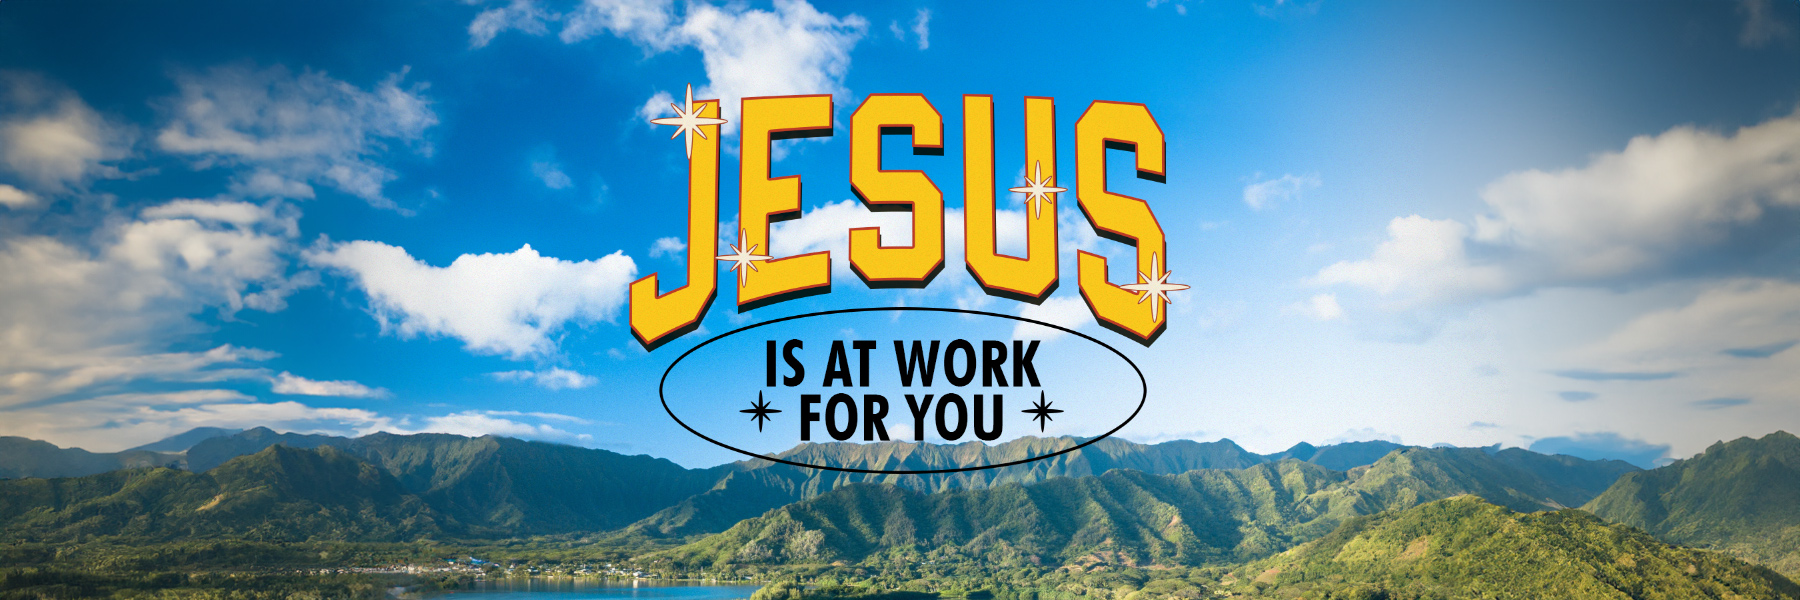 Jesus Is at Work for You